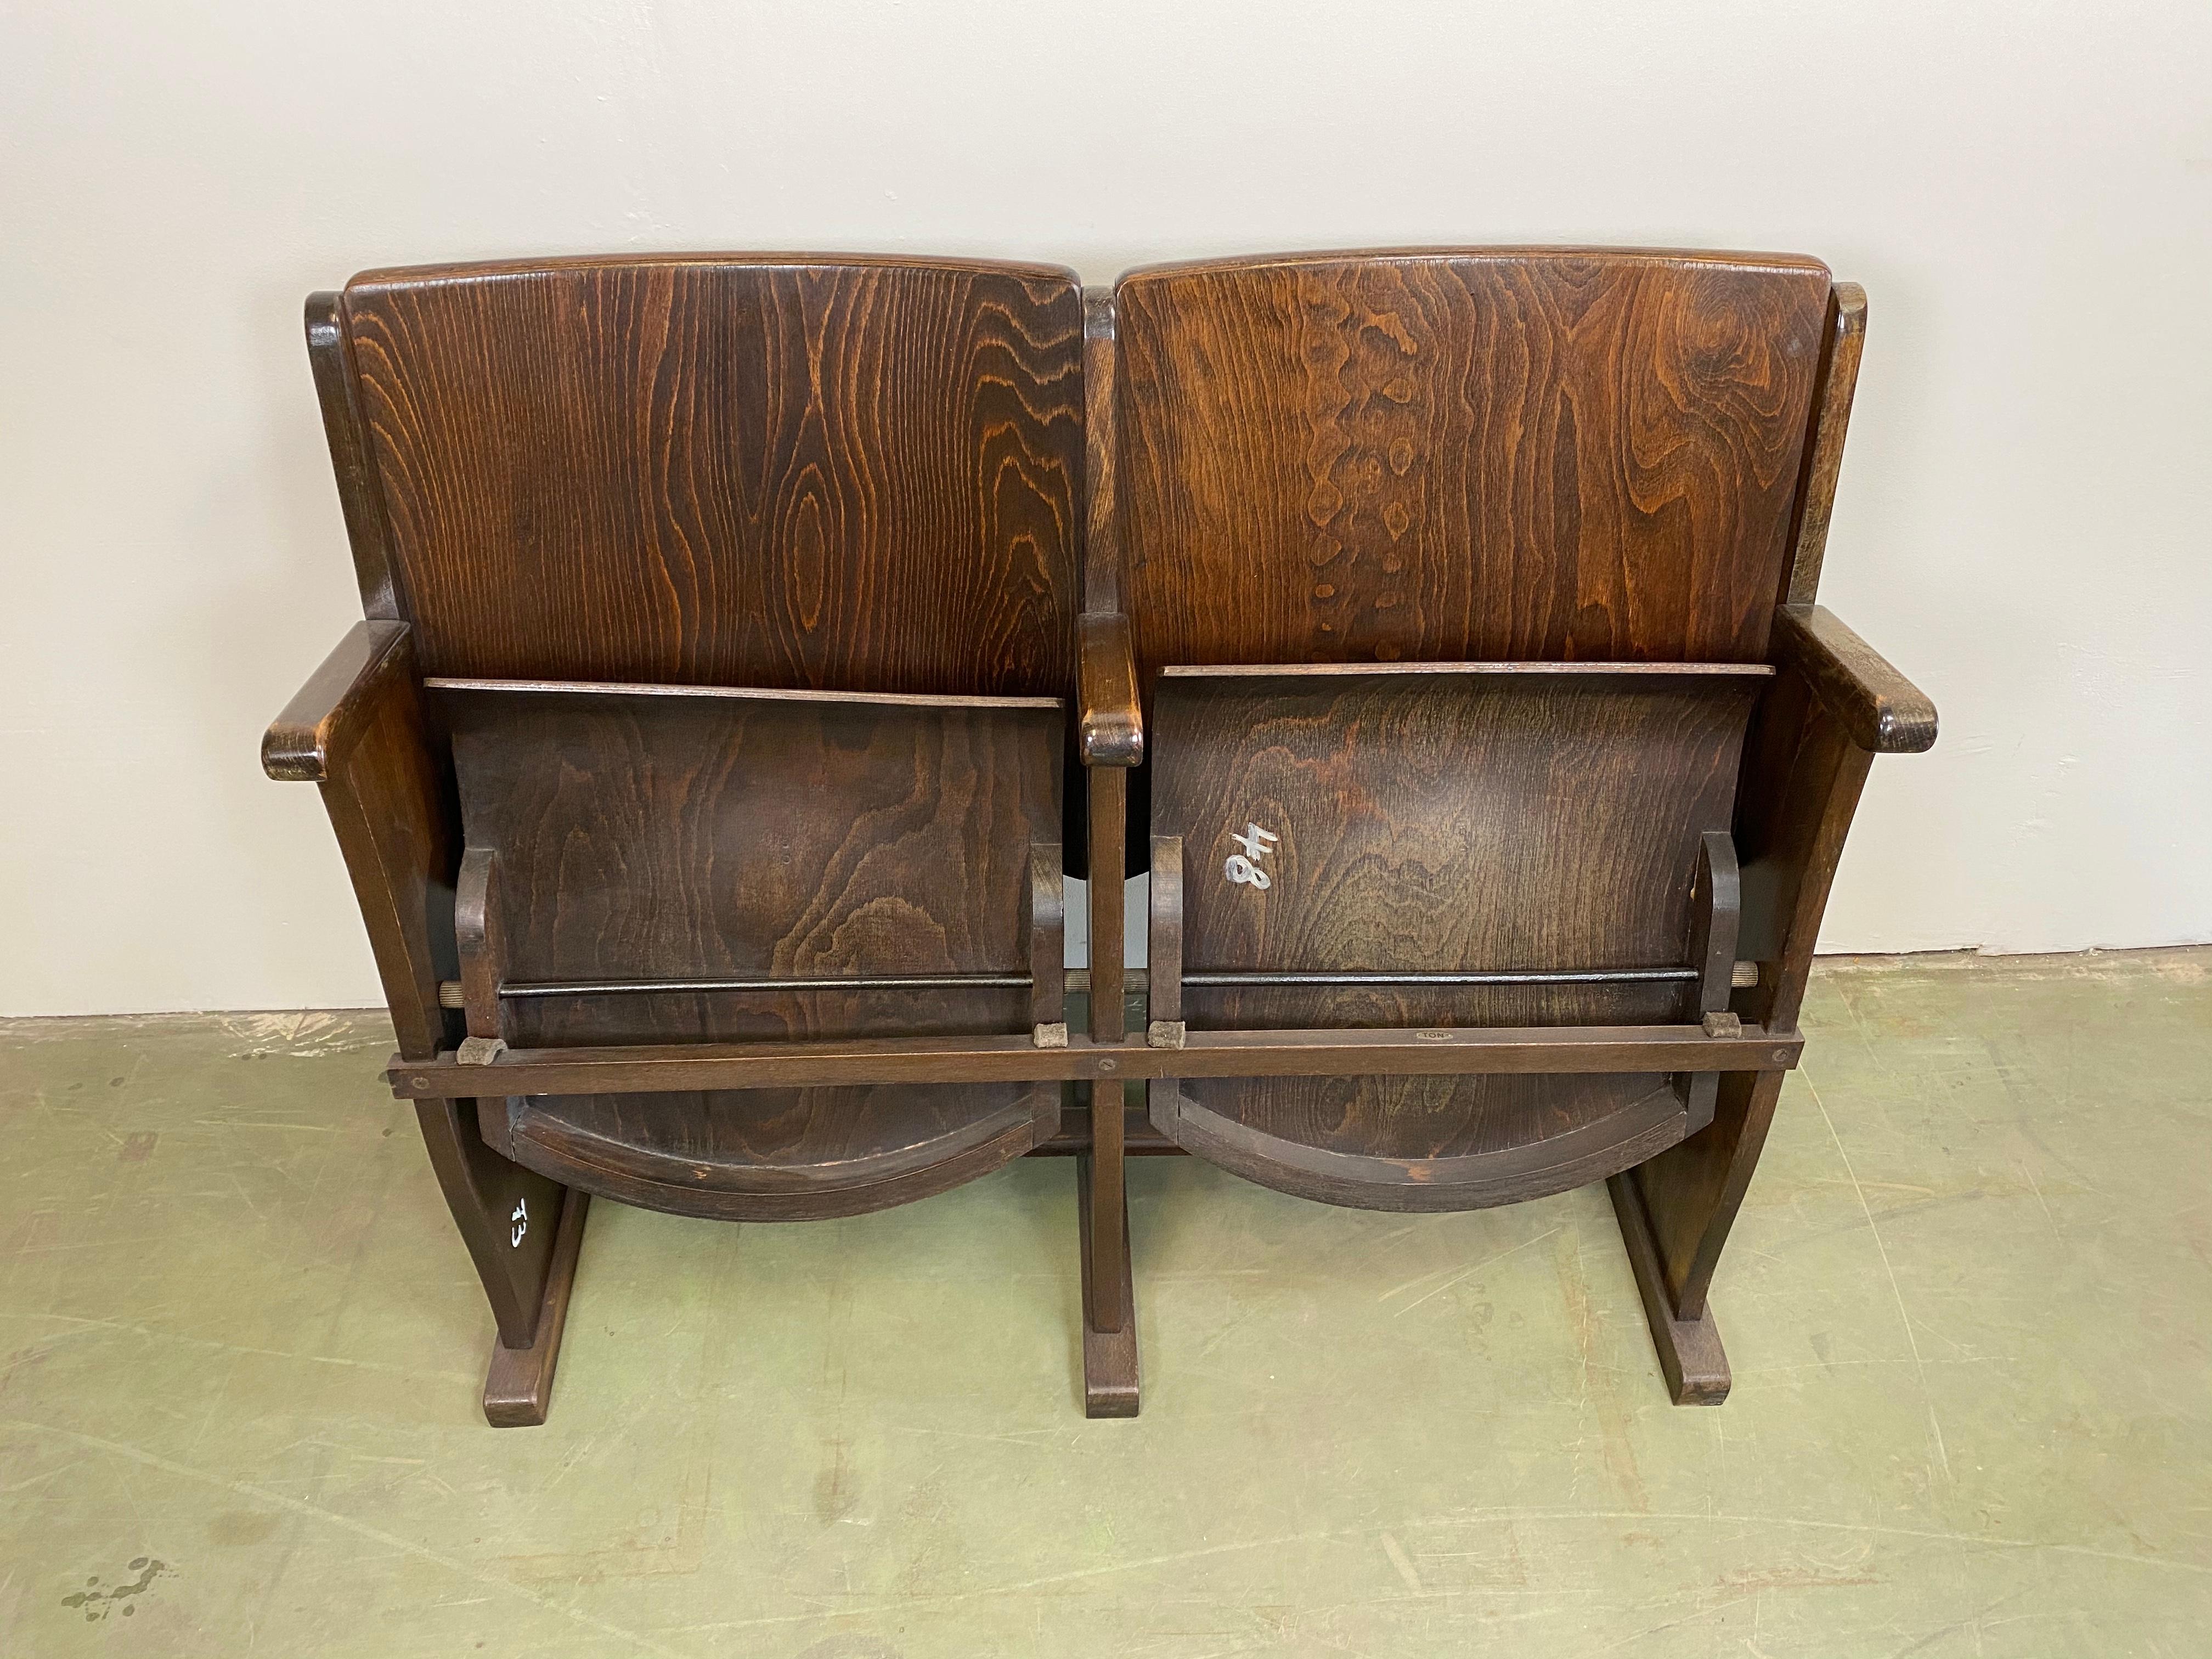 This two-seat cinema bench was produced by Ton (former Thonet) in Czechoslovakia during the 1950s. The chairs are stabile and can be placed anywhere. It is completely made of wood (partly solid wood, partly plywood). The seats fold upwards. The